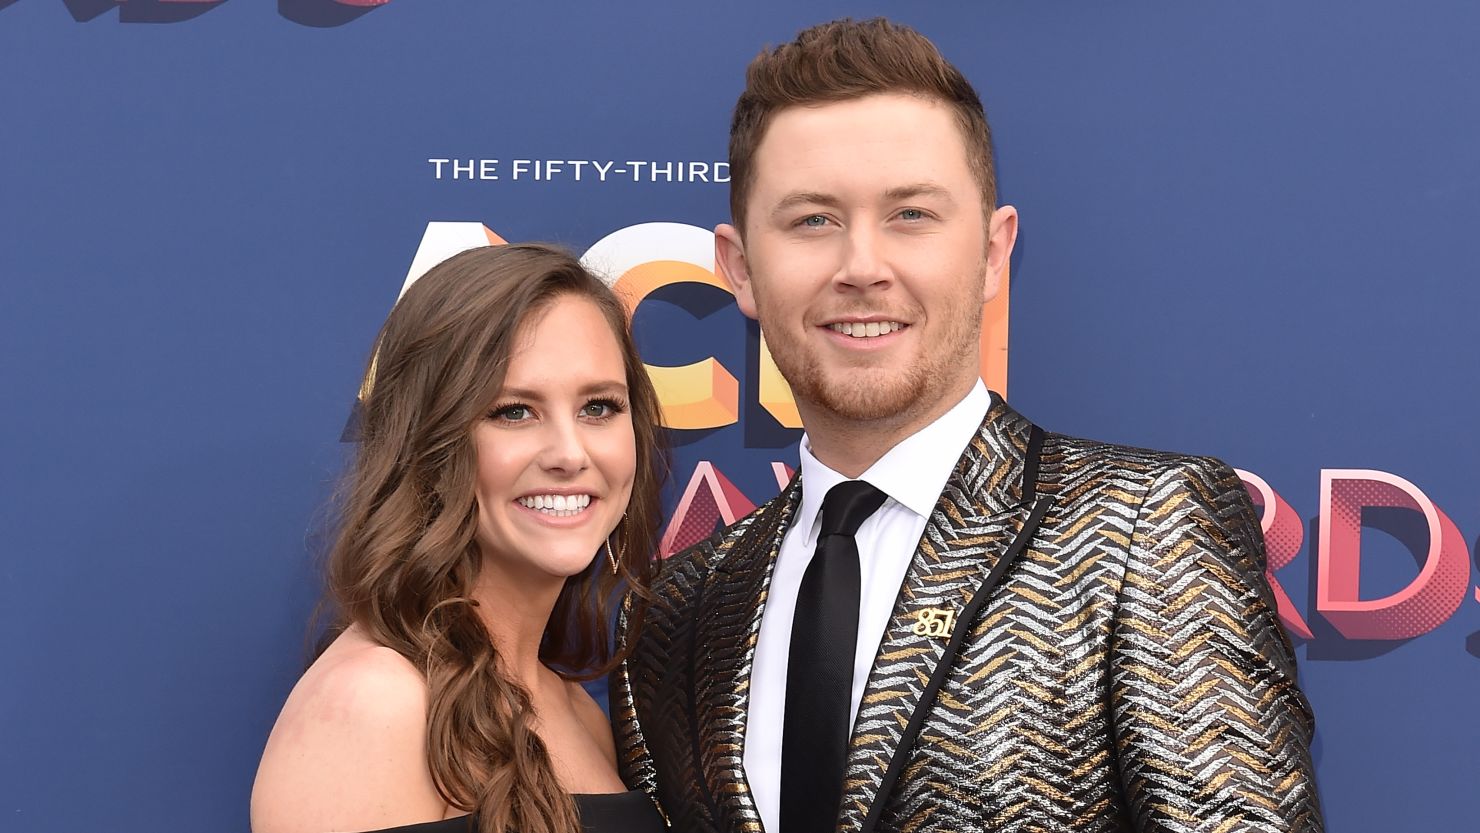 Singer Scotty McCreery and Gabi Dugal attend the 53rd Academy of Country Music Awards on April 15, 2018, in Las Vegas.  